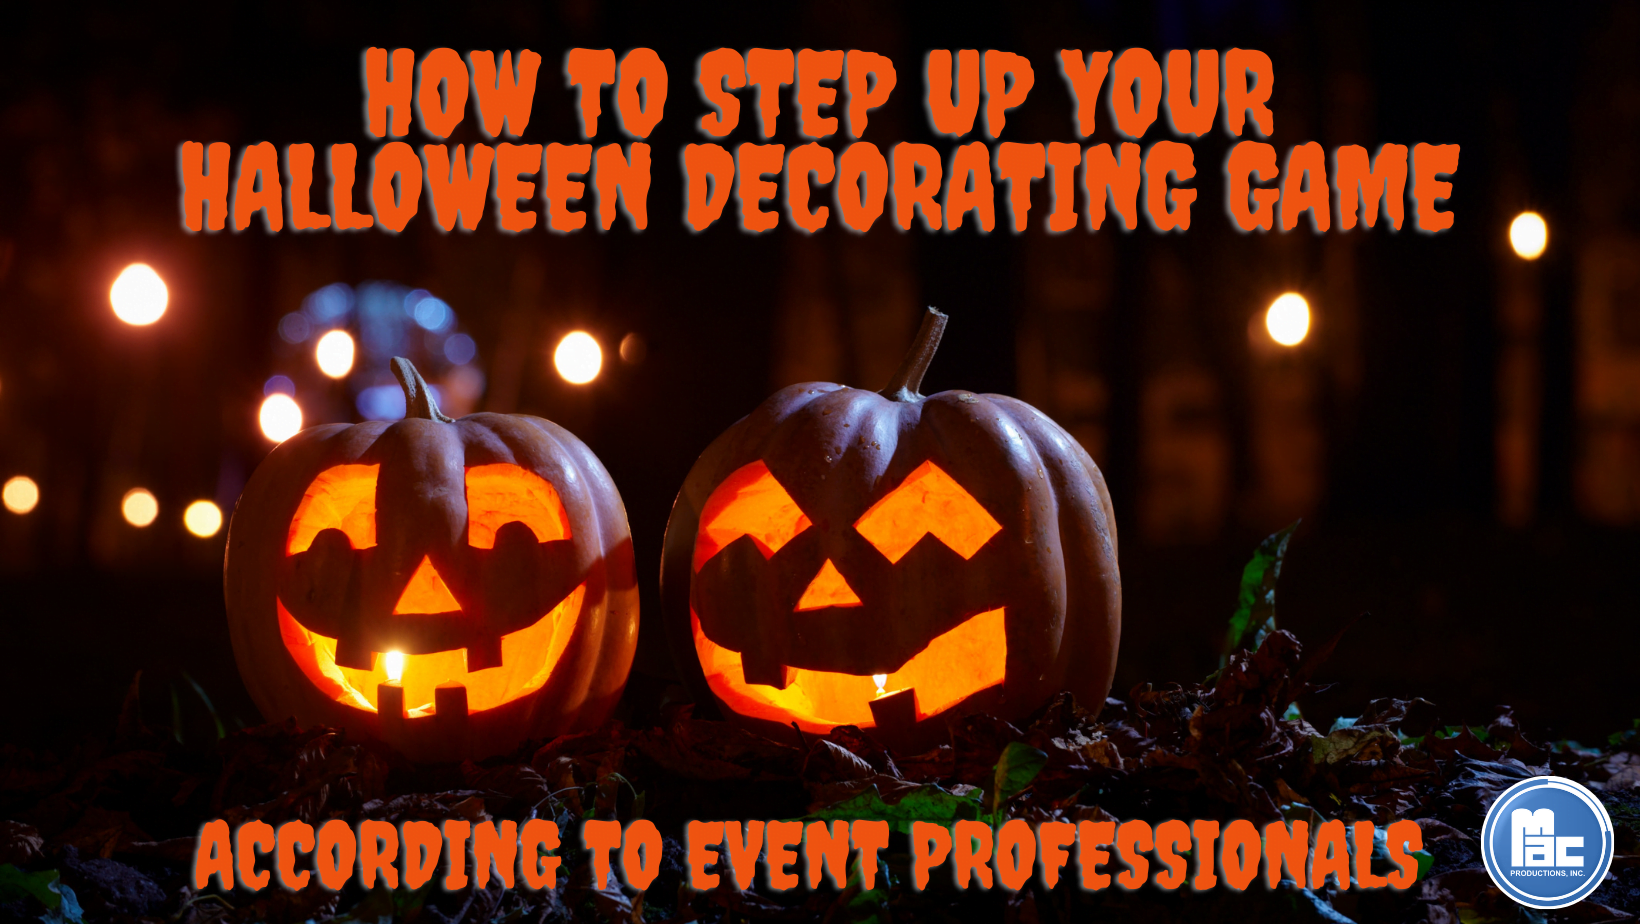 Two jack-o-lanterns with the text "how to step up your halloween decorating game, according to event professionals"